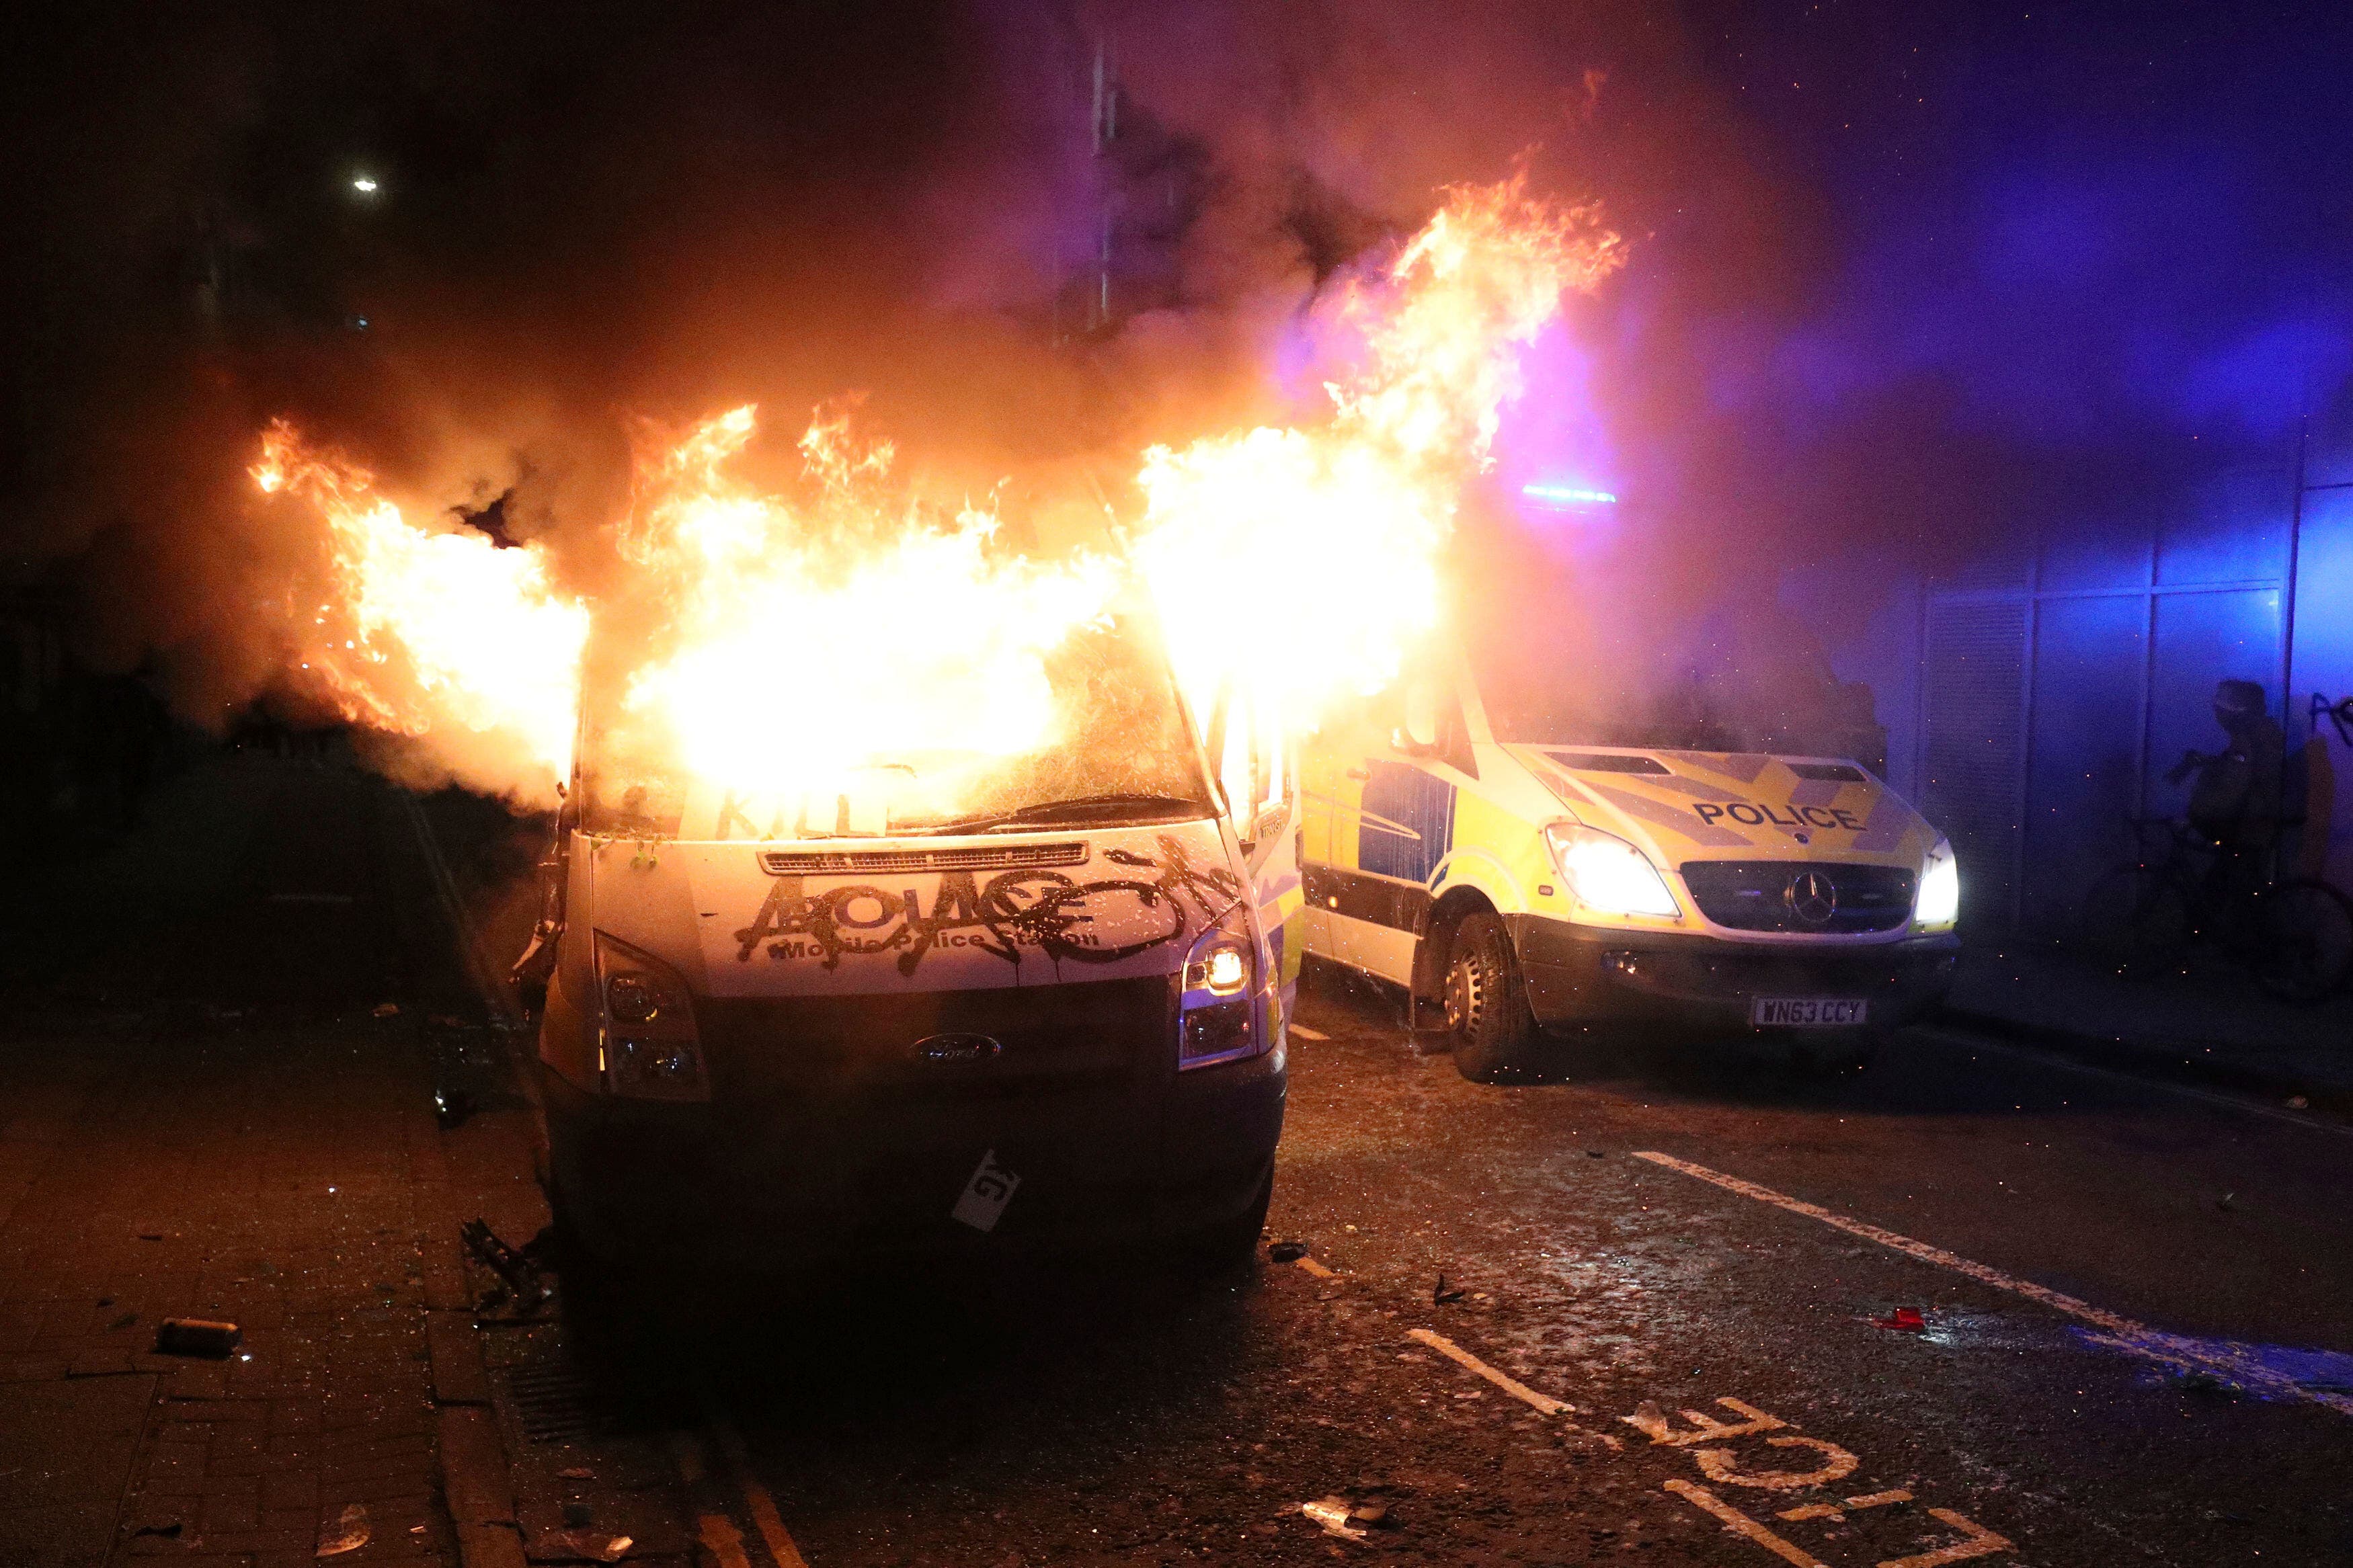 Wounded policemen, vehicles set on fire in violent protest in Bristol, England